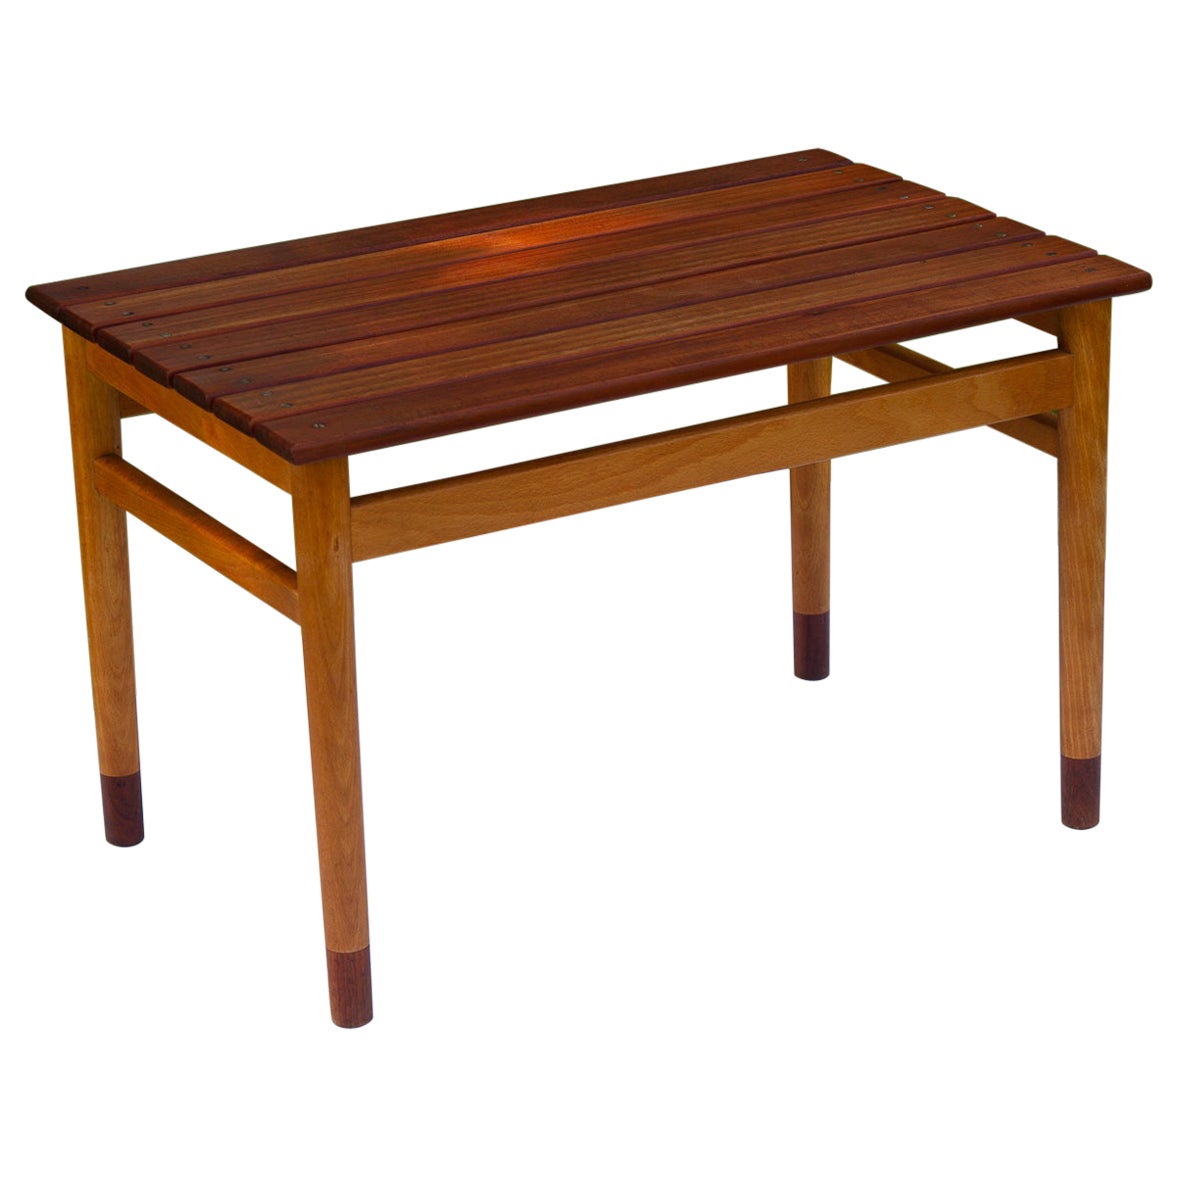 Vintage Danish Teak and Beech Side Table, 1950s For Sale